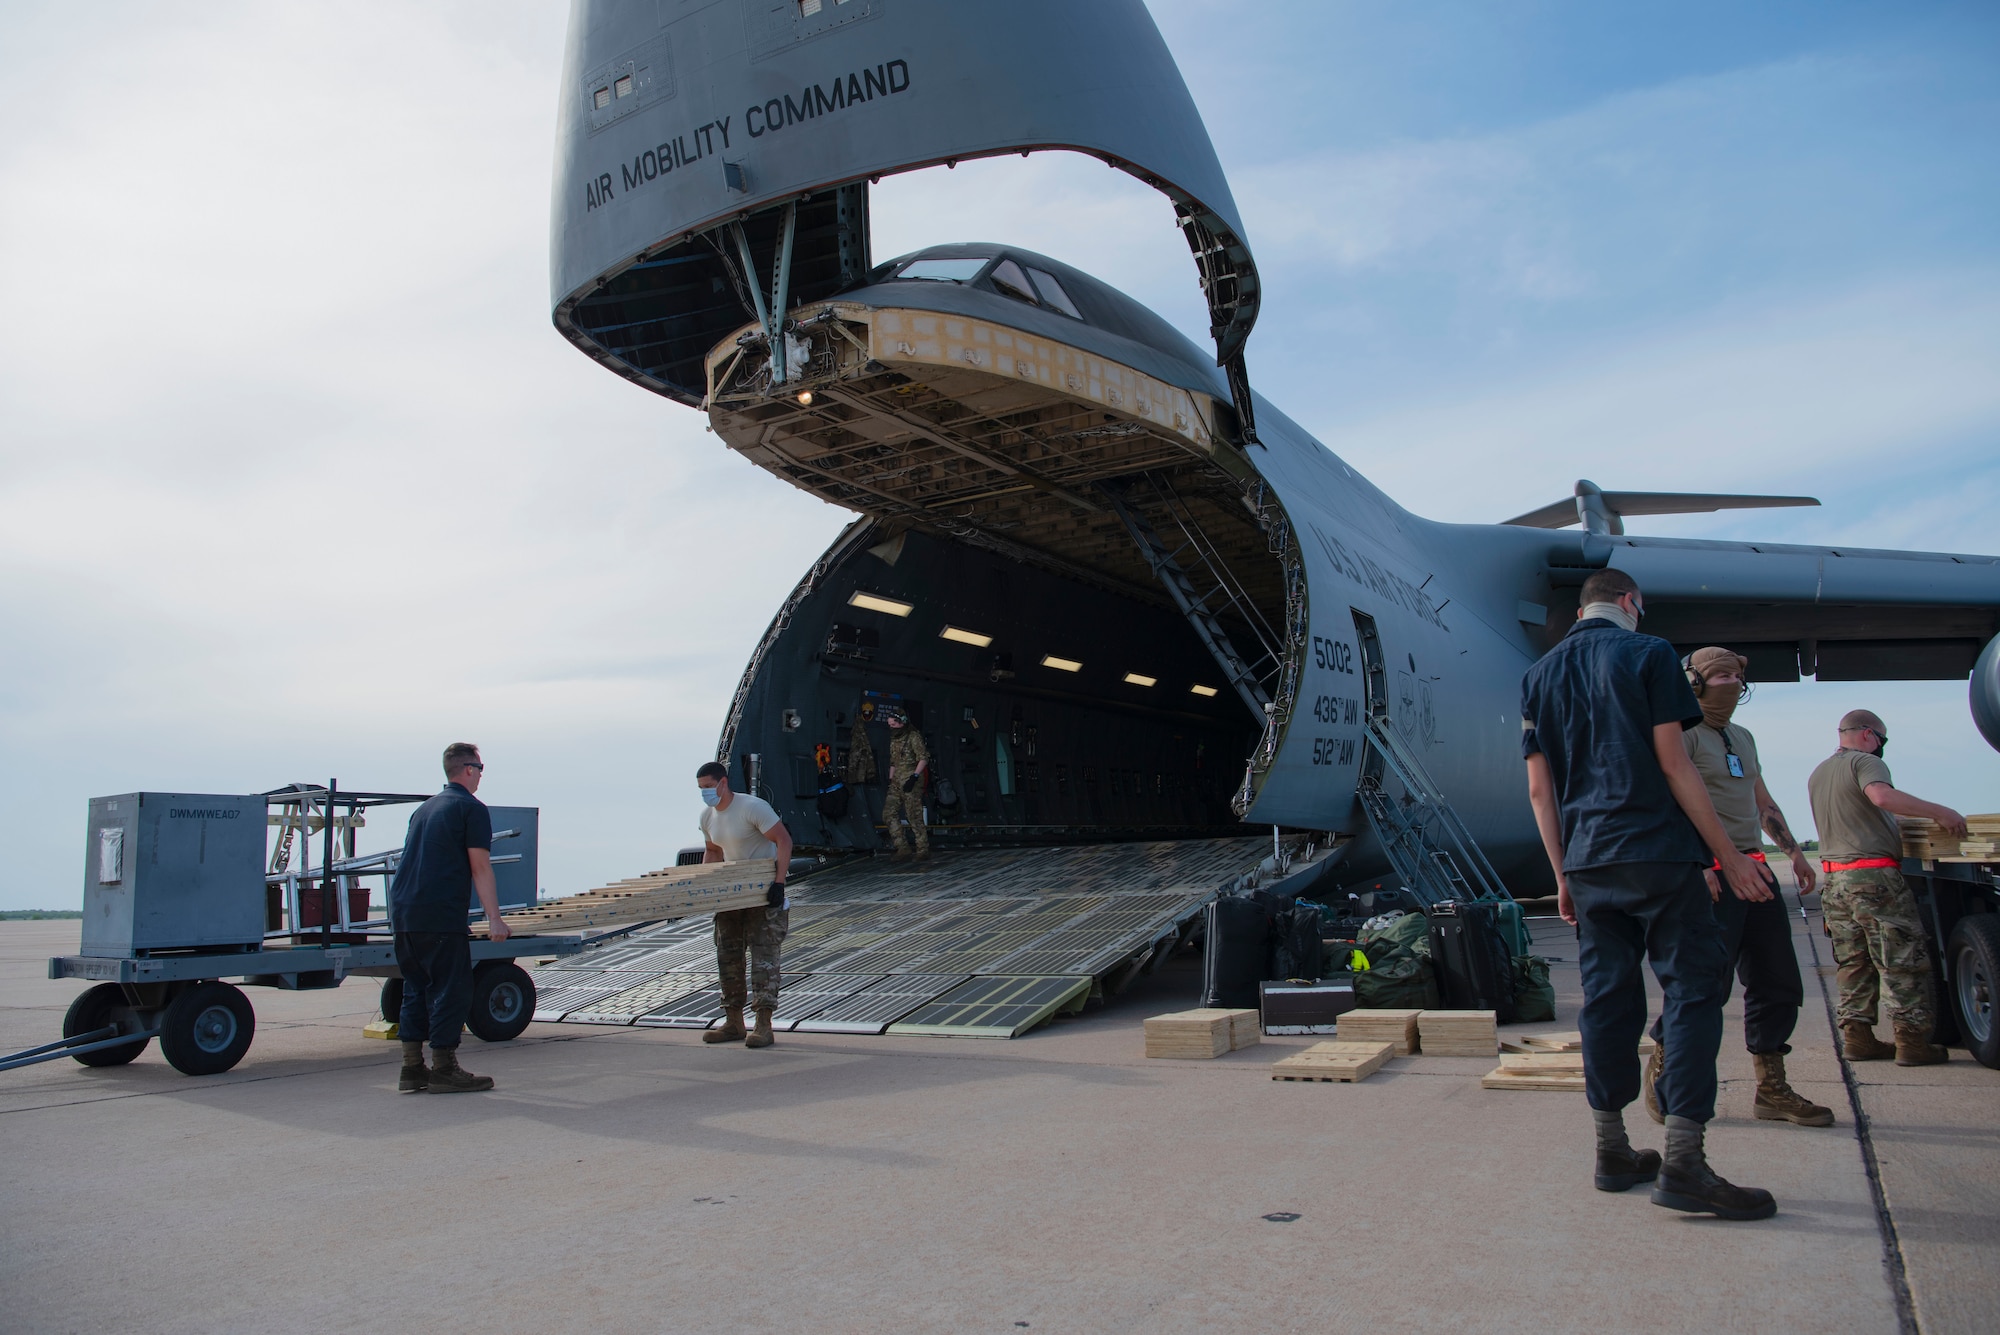 Airmen from the 7th Equipment Maintenance Squadron prepare ramps to load cargo onto a C-5 Galaxy assigned to Dover Air Force Base, Delaware, at Dyess AFB, Texas, April 27, 2020. The C-5 transported Bomber Task Force equipment for four B-1B Lancers and approximately 200 Airmen to Andersen AFB, Guam. The BTF supports Pacific Air Forces' training efforts with allies, partners and joint forces; and strategic deterrence mission to reinforce the rules-based international order in the Indo-Pacific region (U.S. Air Force photo by Airman 1st Class Nicole Molignano)